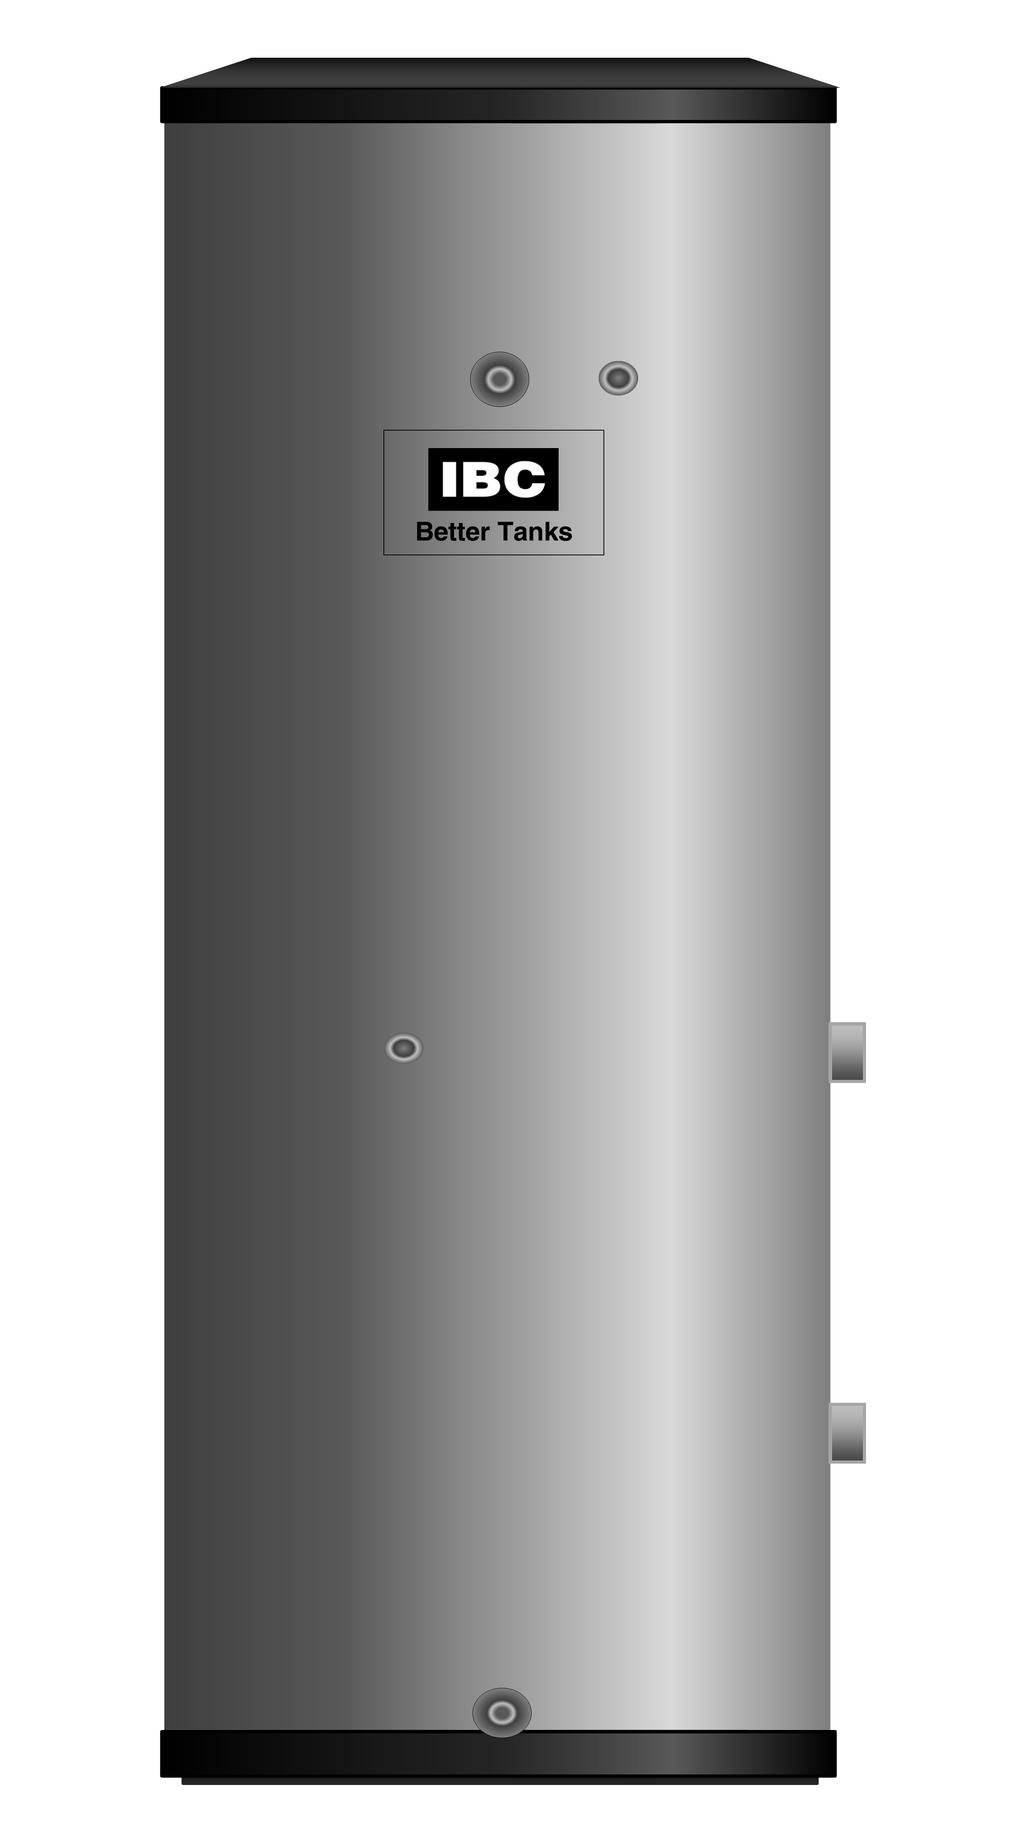 In order to insure proper service, the following information is provided to assist in enabling the installation, operation, and maintenance of this water heater.